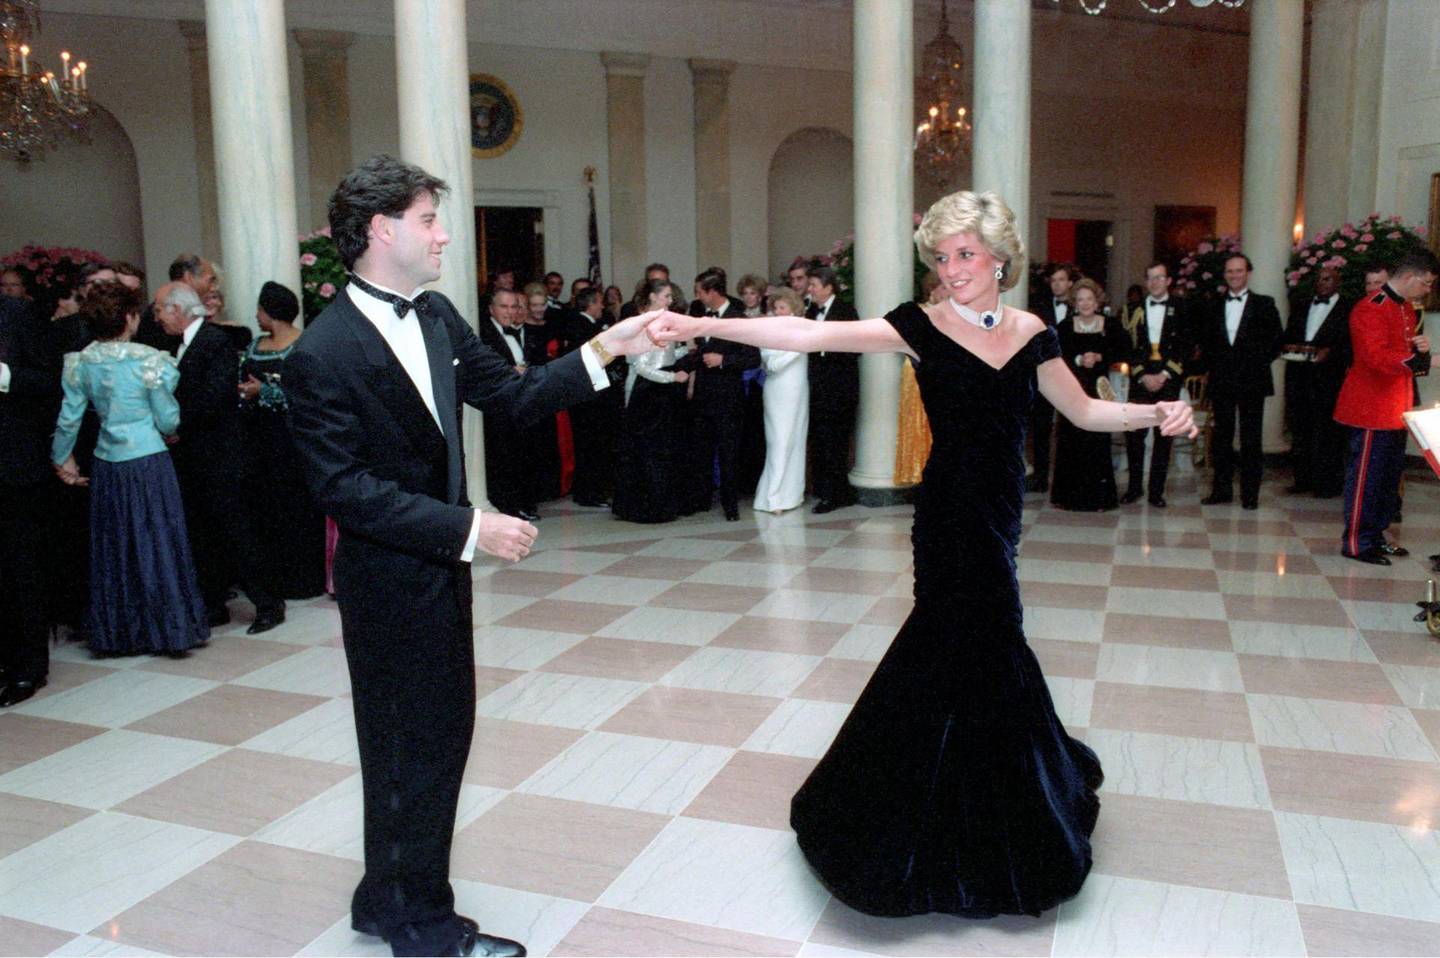 Mandatory Credit: Photo by REX/Shutterstock (2662657b)
Princess Diana dances with John Travolta
White House dinner, Washington DC, America - 09 Nov 1985
Previously unseen photos of Princess Diana dancing with a host of stars at a White House dinner in 1985 have emerged. At the event the late Princess famously showed off her dance moves with Saturday Night Fever king John Travolta. However, now new images reveal that the then 24-year-old royal also took to the dance floor with a number of other famous faces. This includes Clint Eastwood, Tom Selleck and United States President Ronald Reagan. For the dinner Diana wore a now famous Victor Edelstein gown, which sold earlier this year for £240,000.
